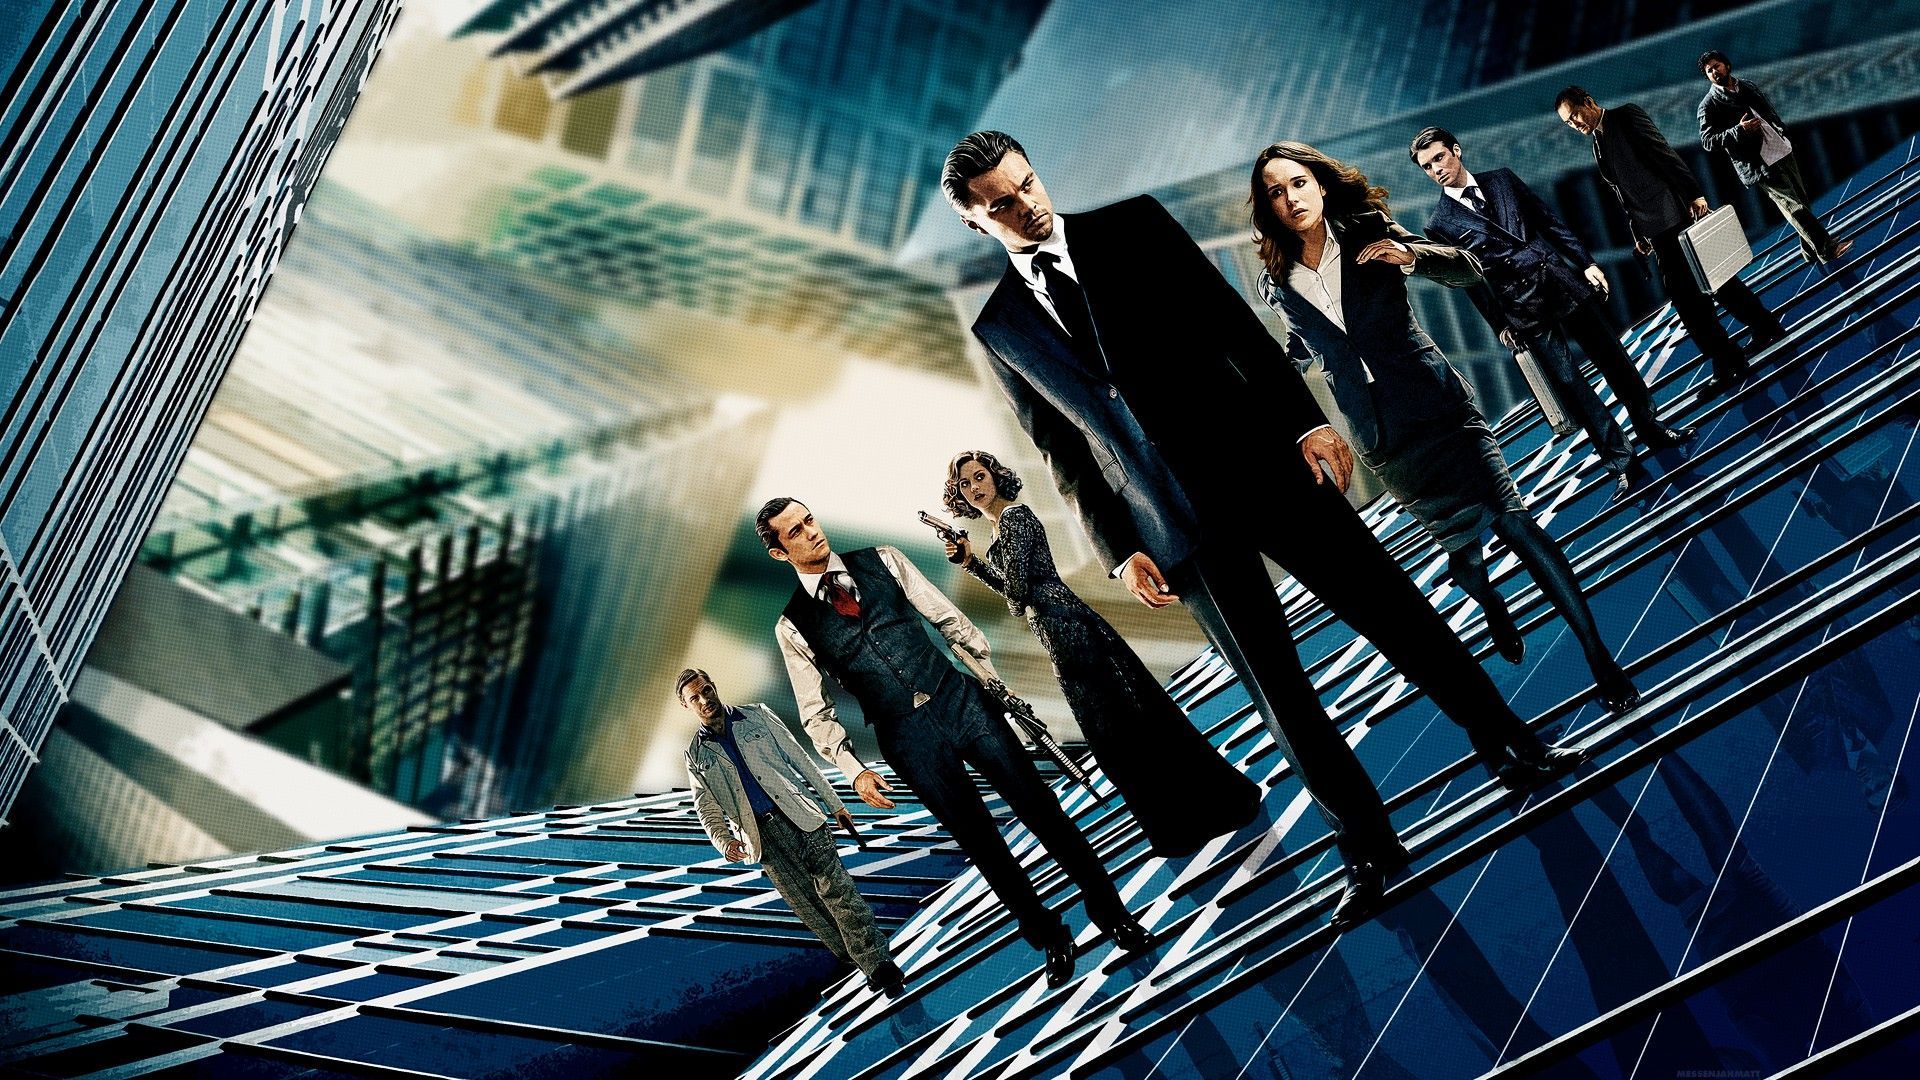 Inception Wallpaper Pictures Image